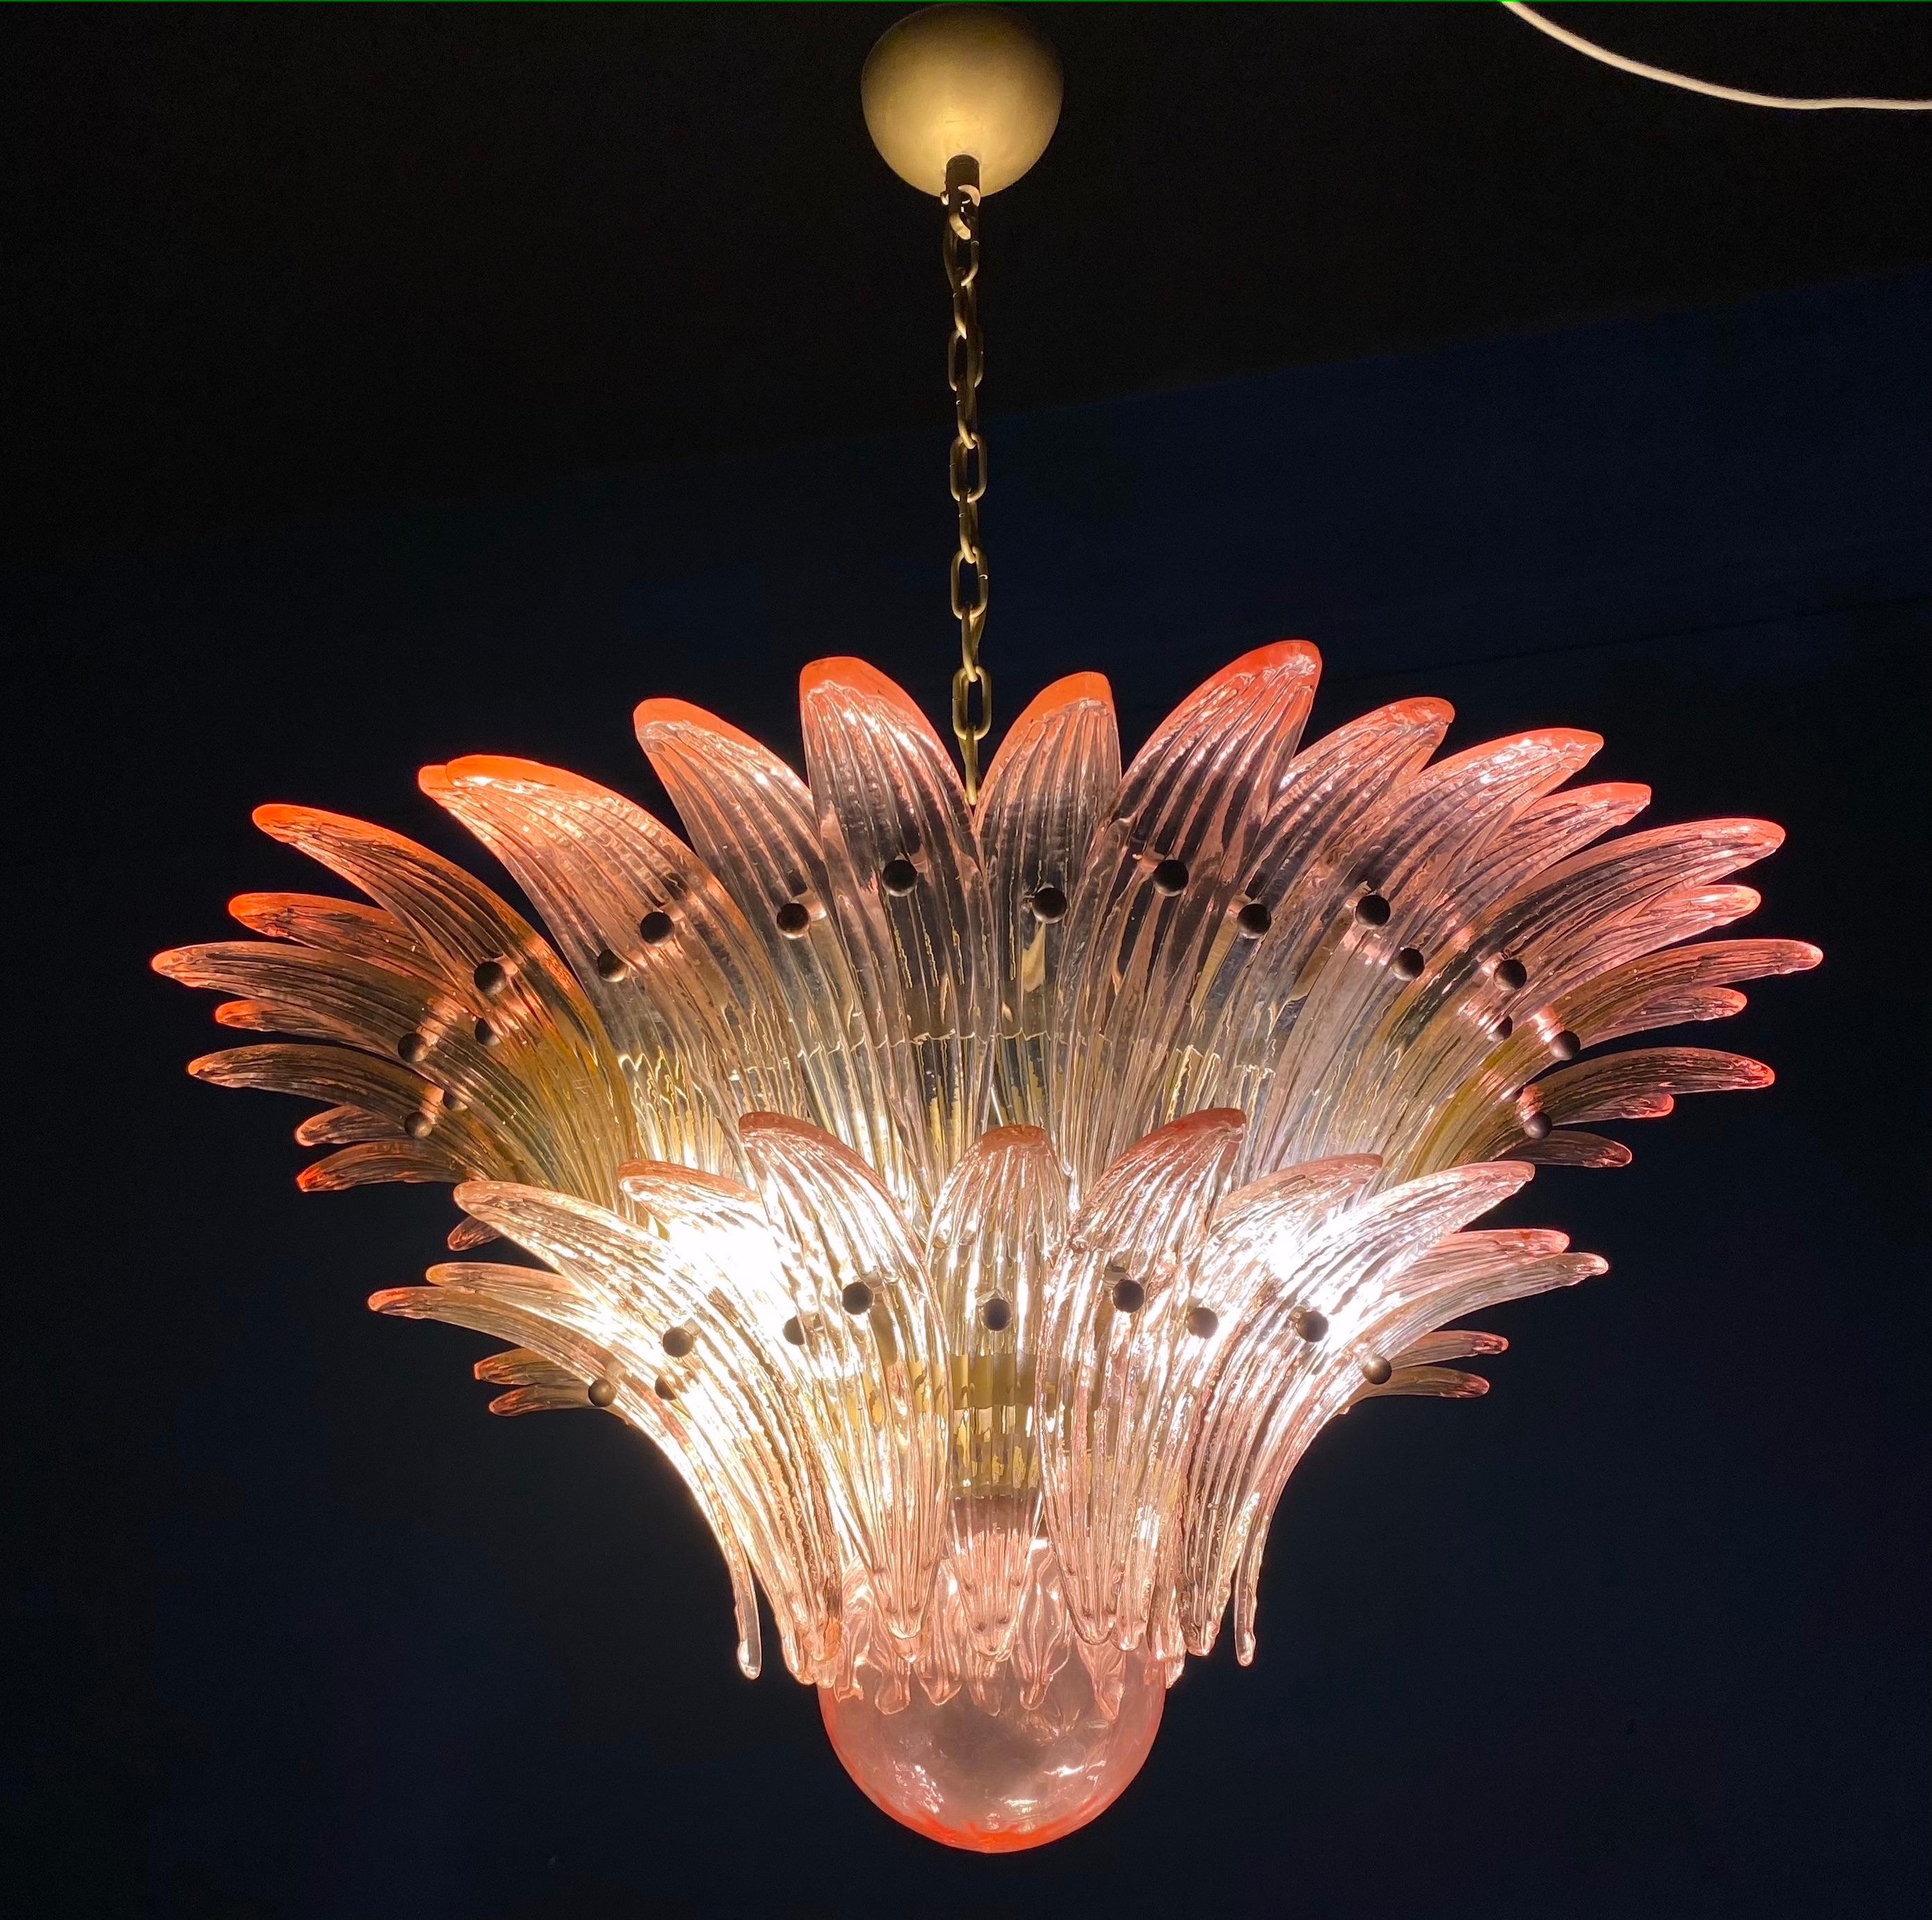 Luxury pink Palmette Murano glass chandelier with a gold metal frame.
Available also a pair and a pair of sconces.
8 light bulbs, E27 dimension
Dimensions: Chandelier 43.30 inches (110 cm), height with chain. Without chain 21.6 inches (55 cm)
37.40